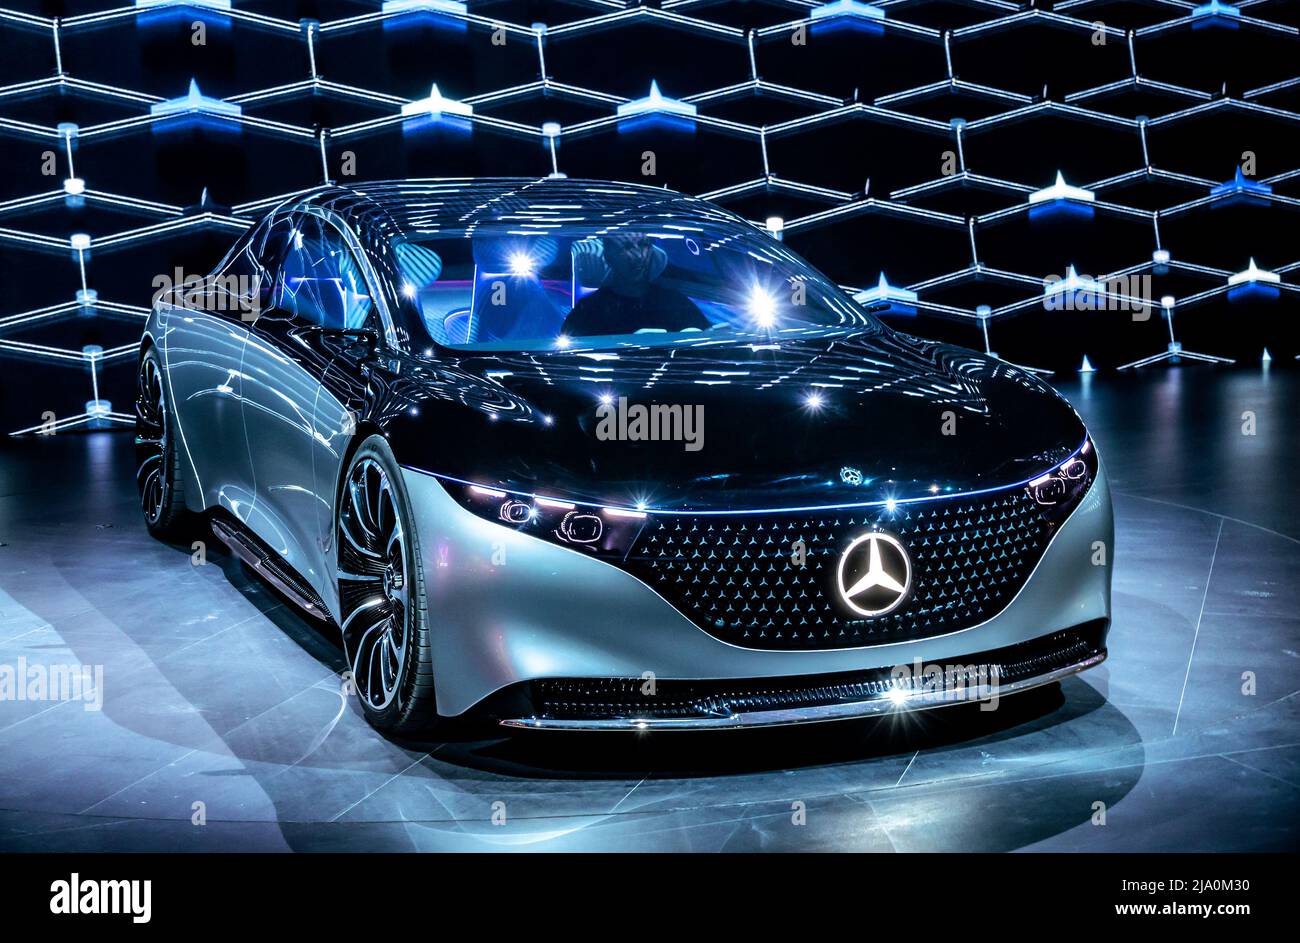 Mercedes-Benz Vision EQS luxury electric concept car showcased at the Frankfurt IAA Motor Show. Germany - September 11, 2019 Stock Photo